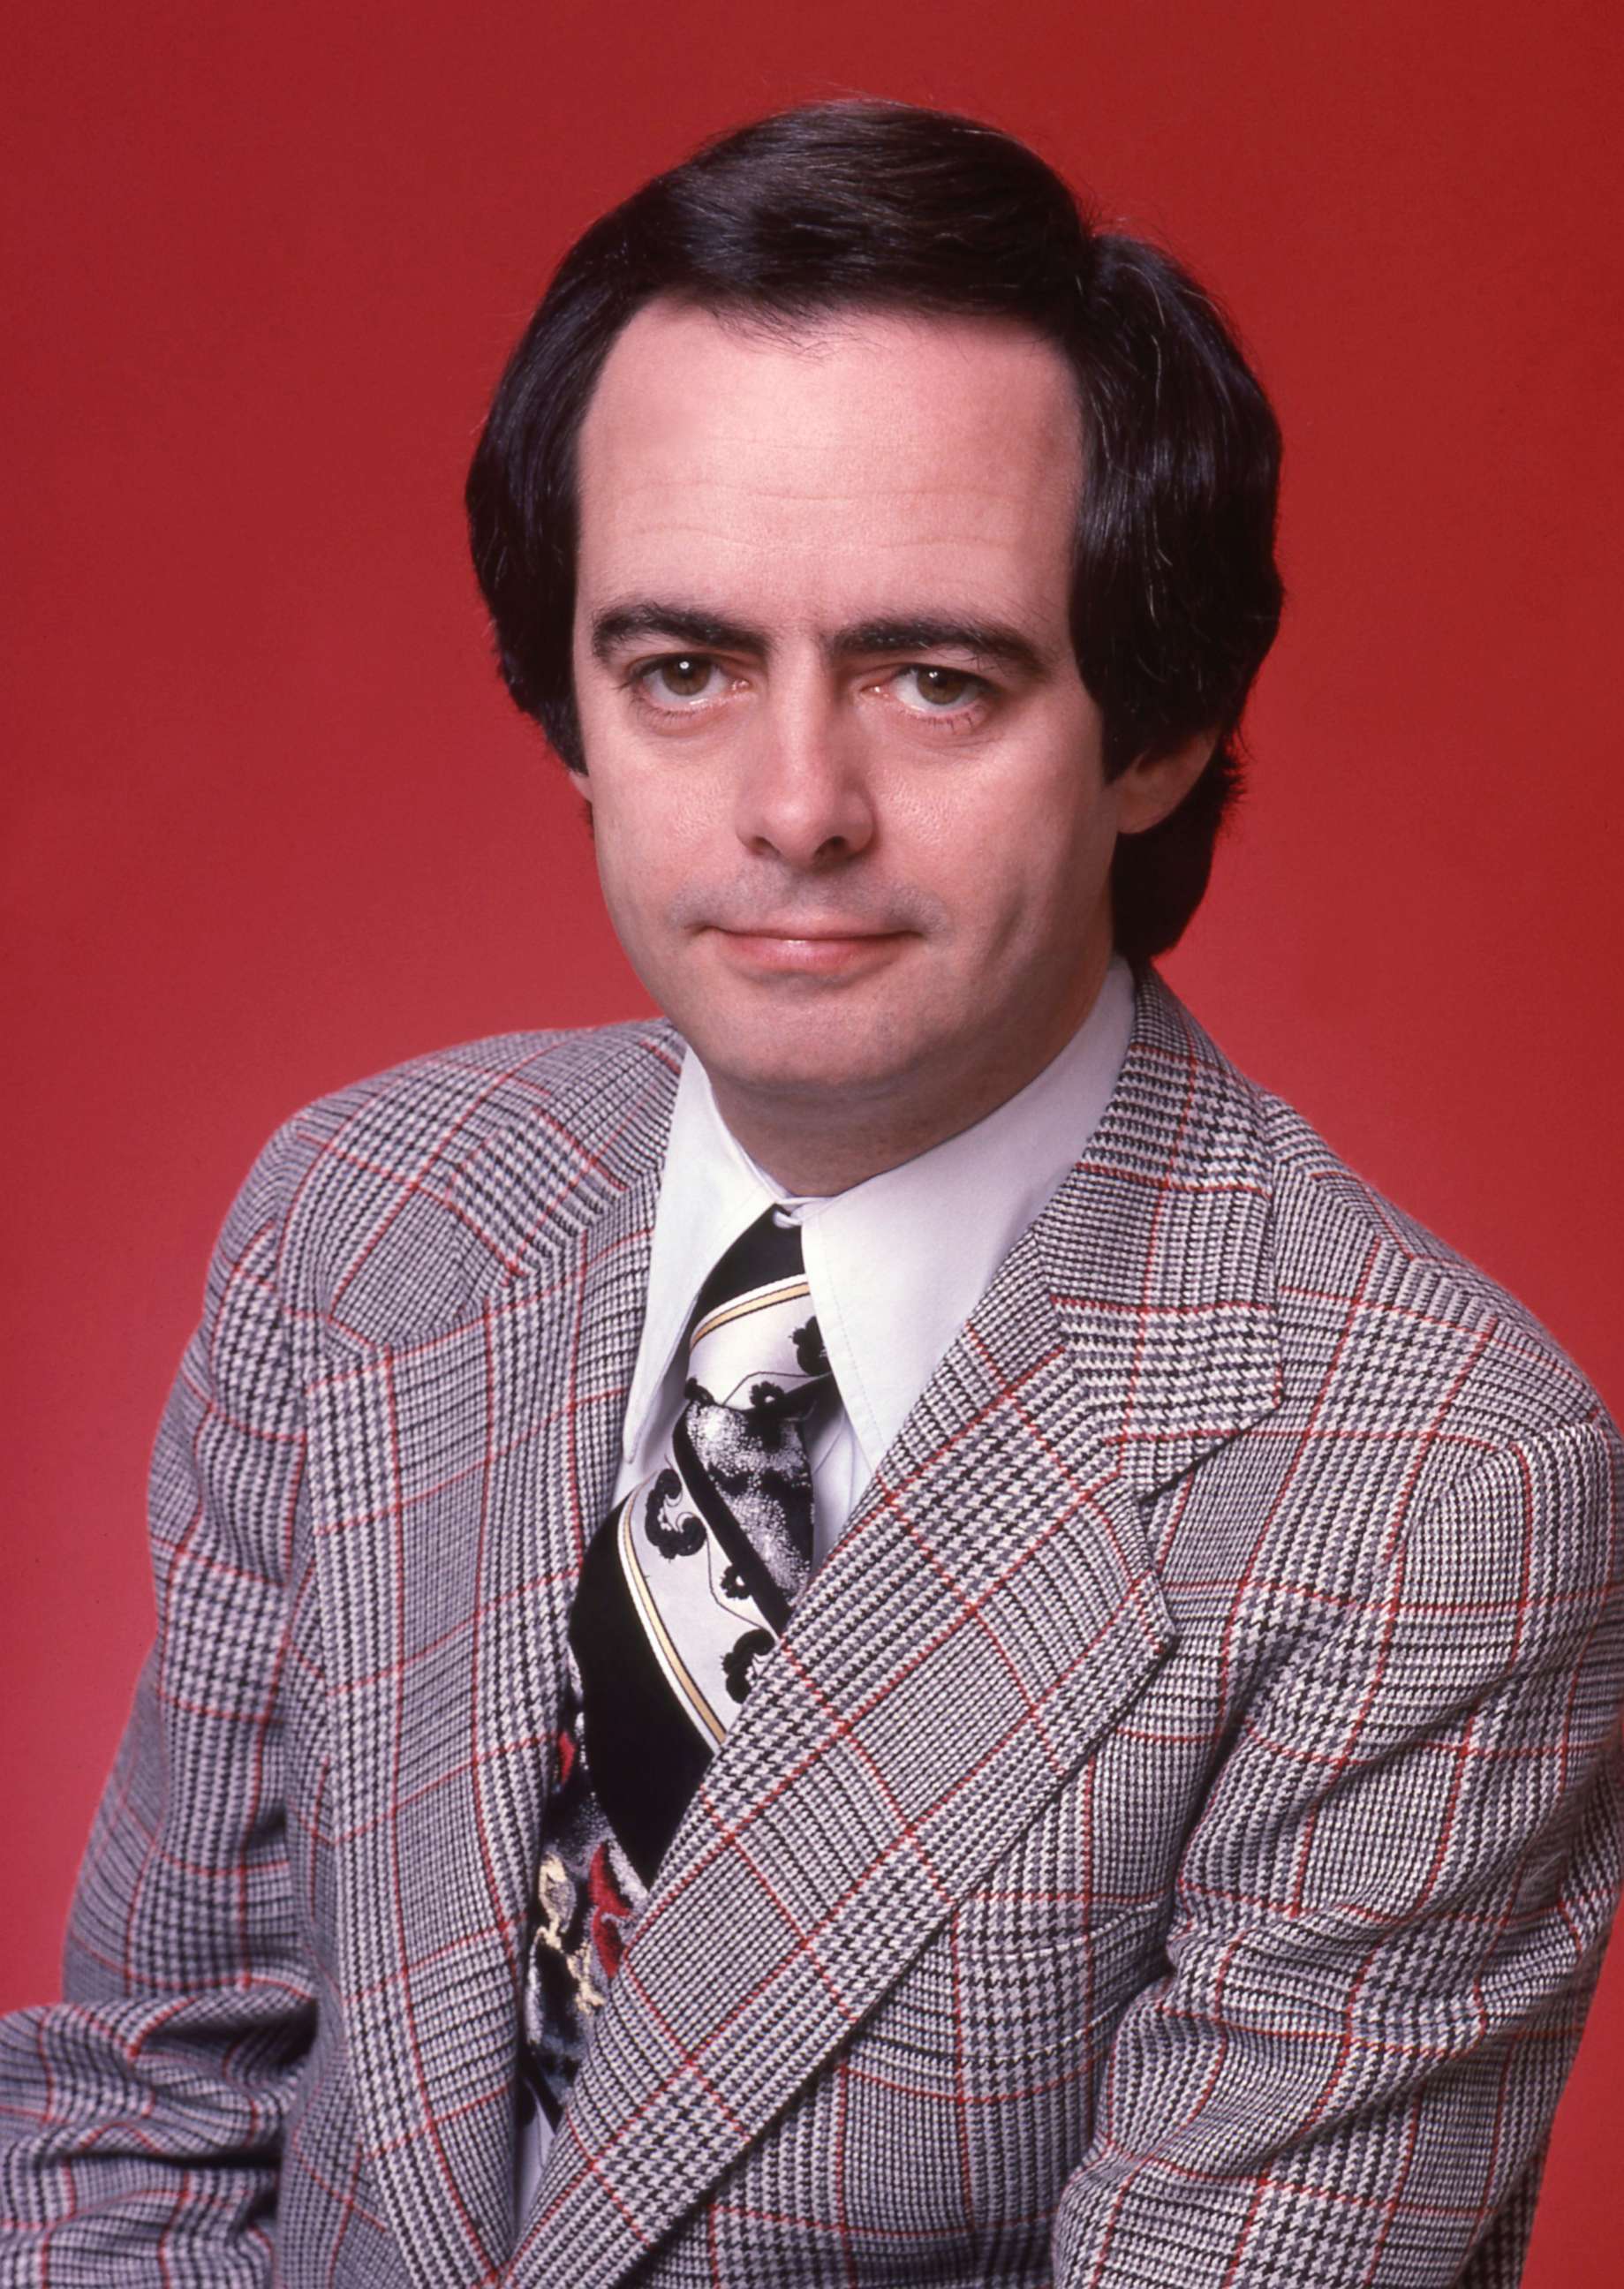 PHOTO: ABC News correspondent Bill Stewart poses for a portrait in February 1978.